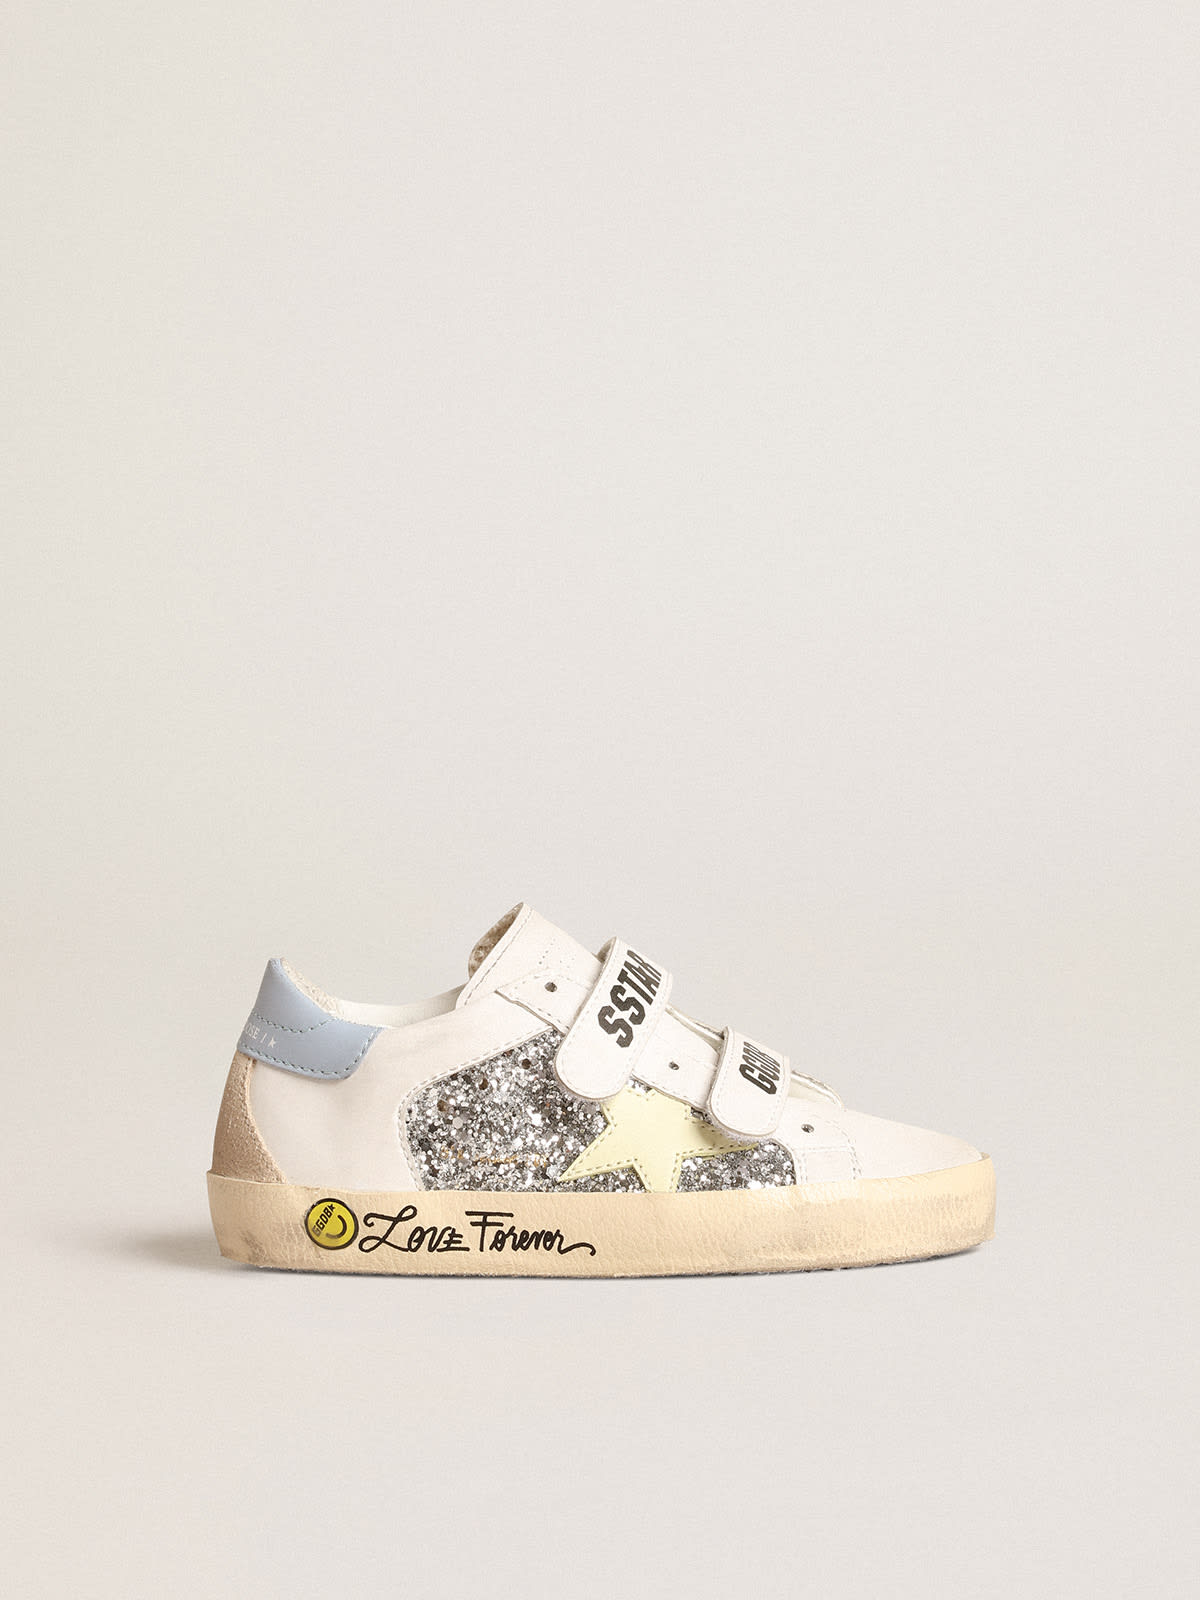 Golden Goose - Bio-based Old School Junior with yellow star and glitter inserts in 